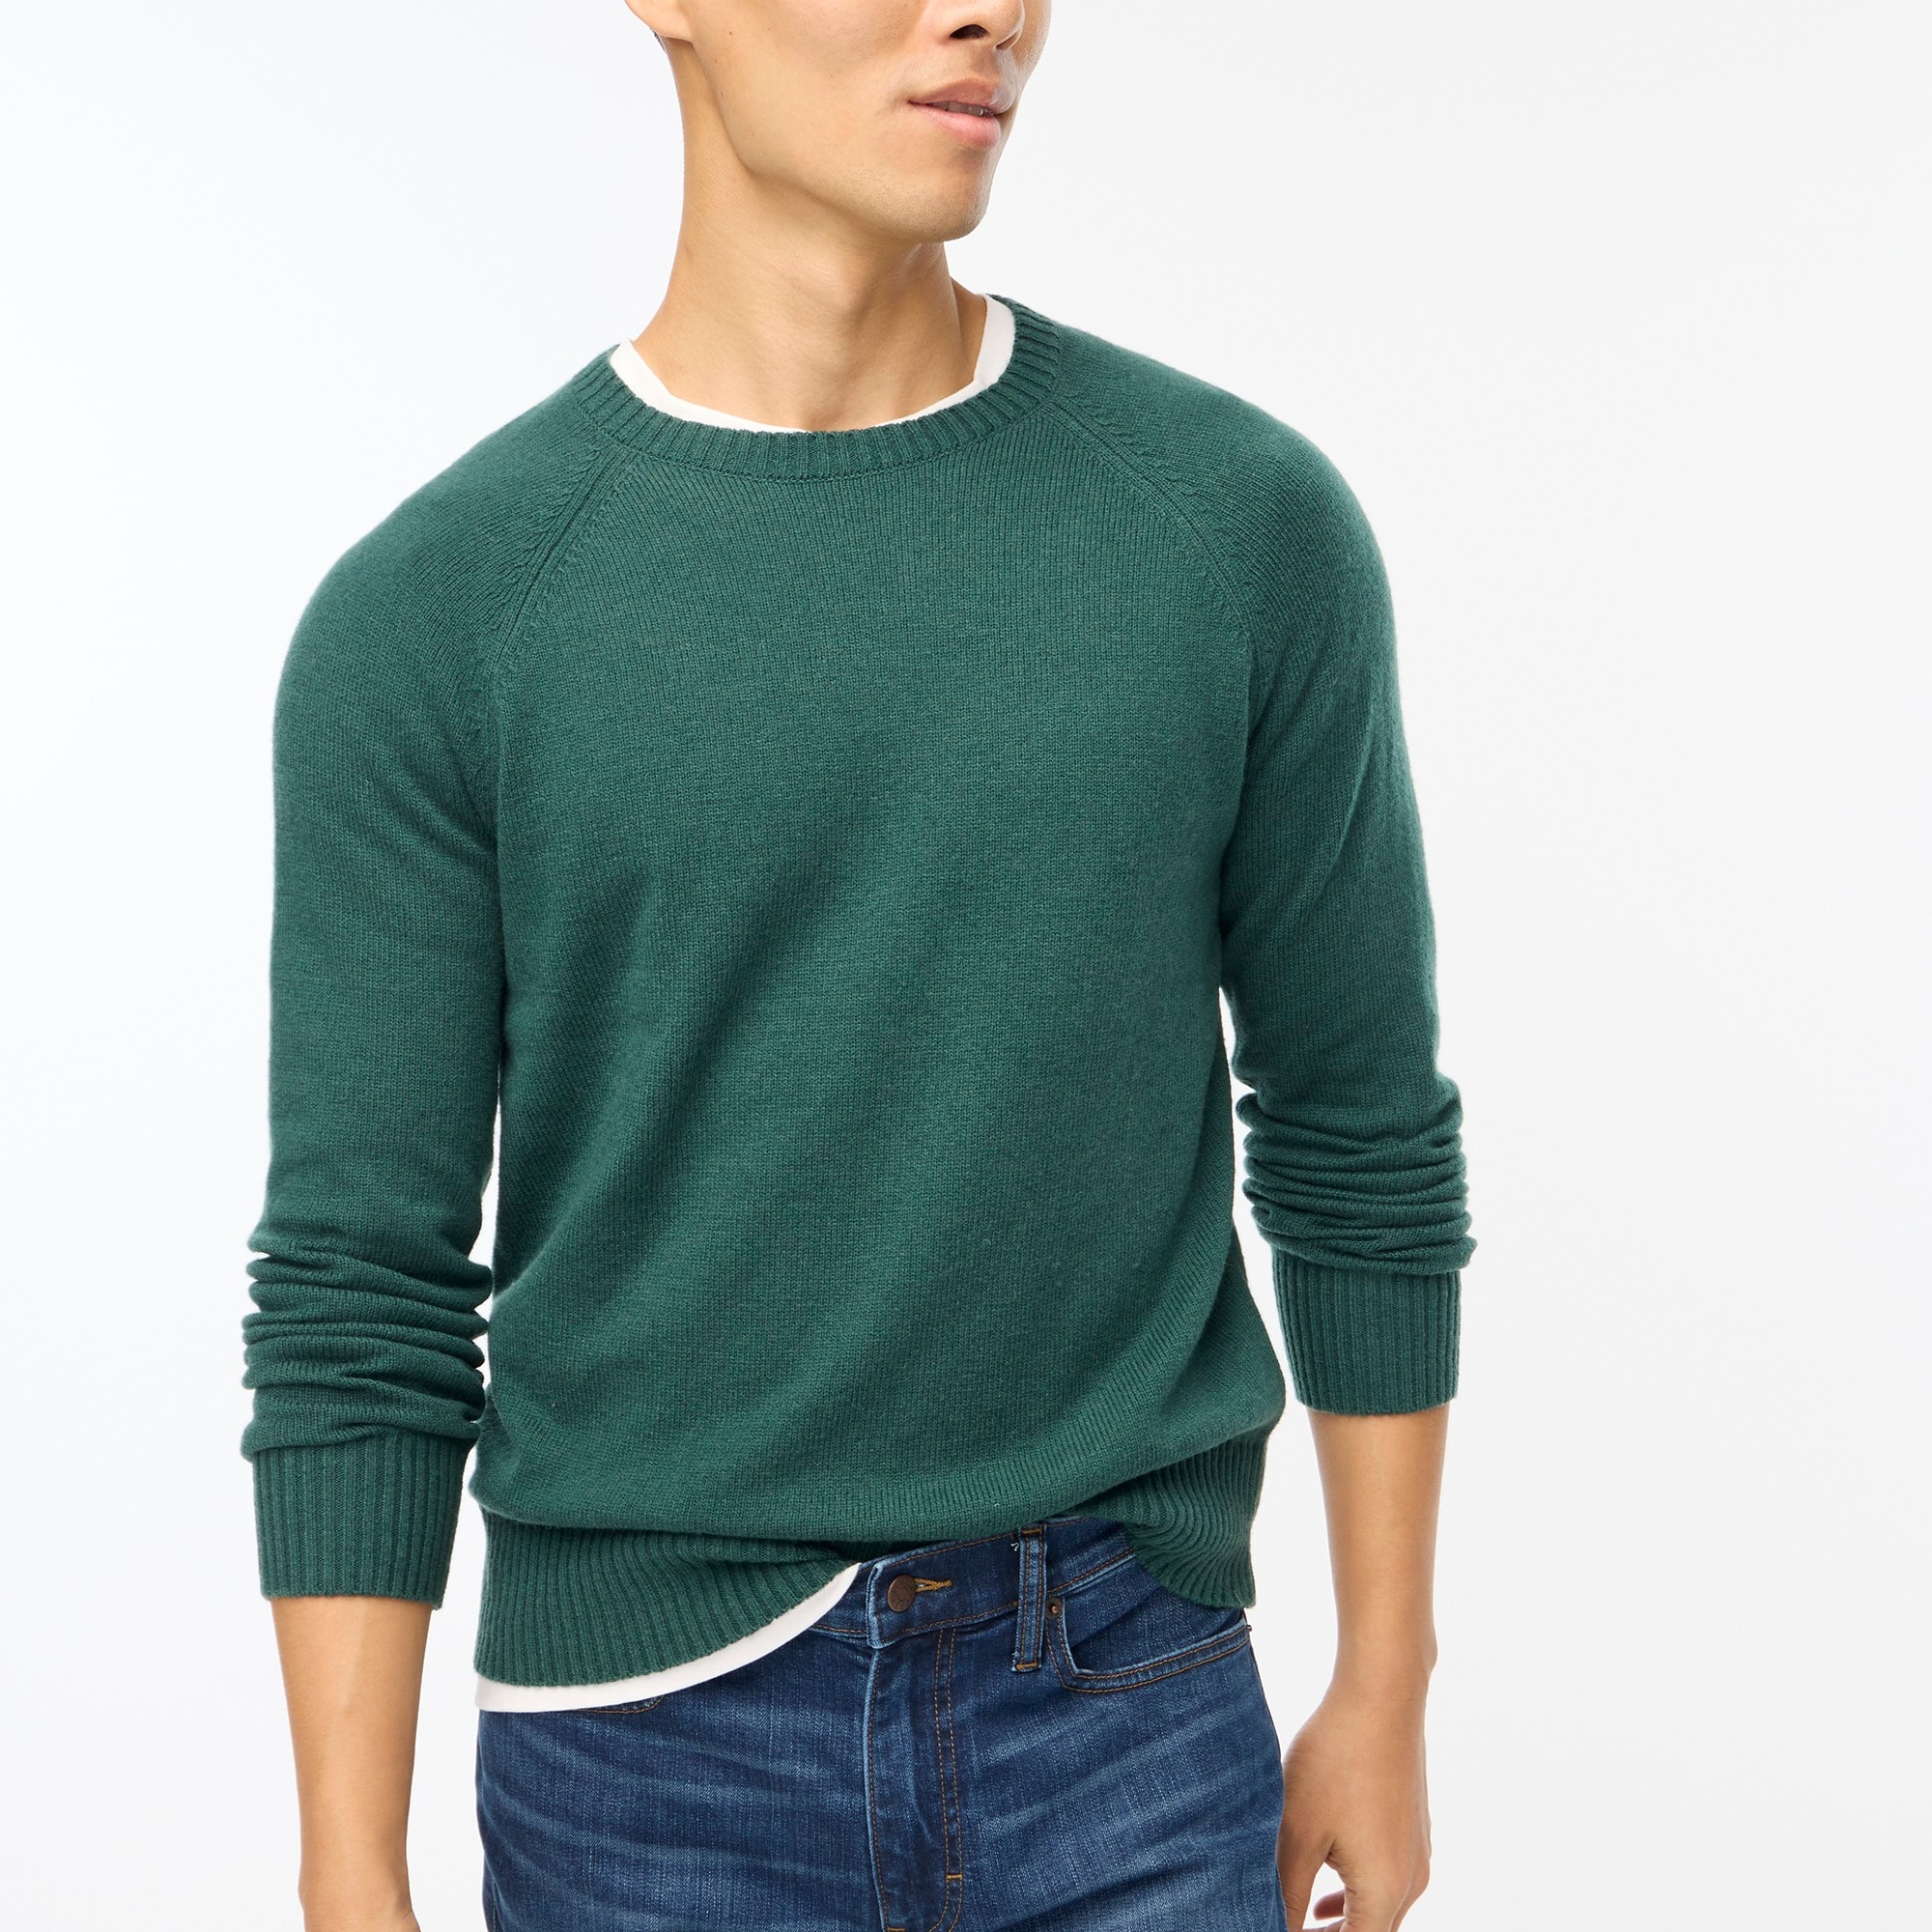 Jcrew Crewneck sweater in supersoft lambswool blend